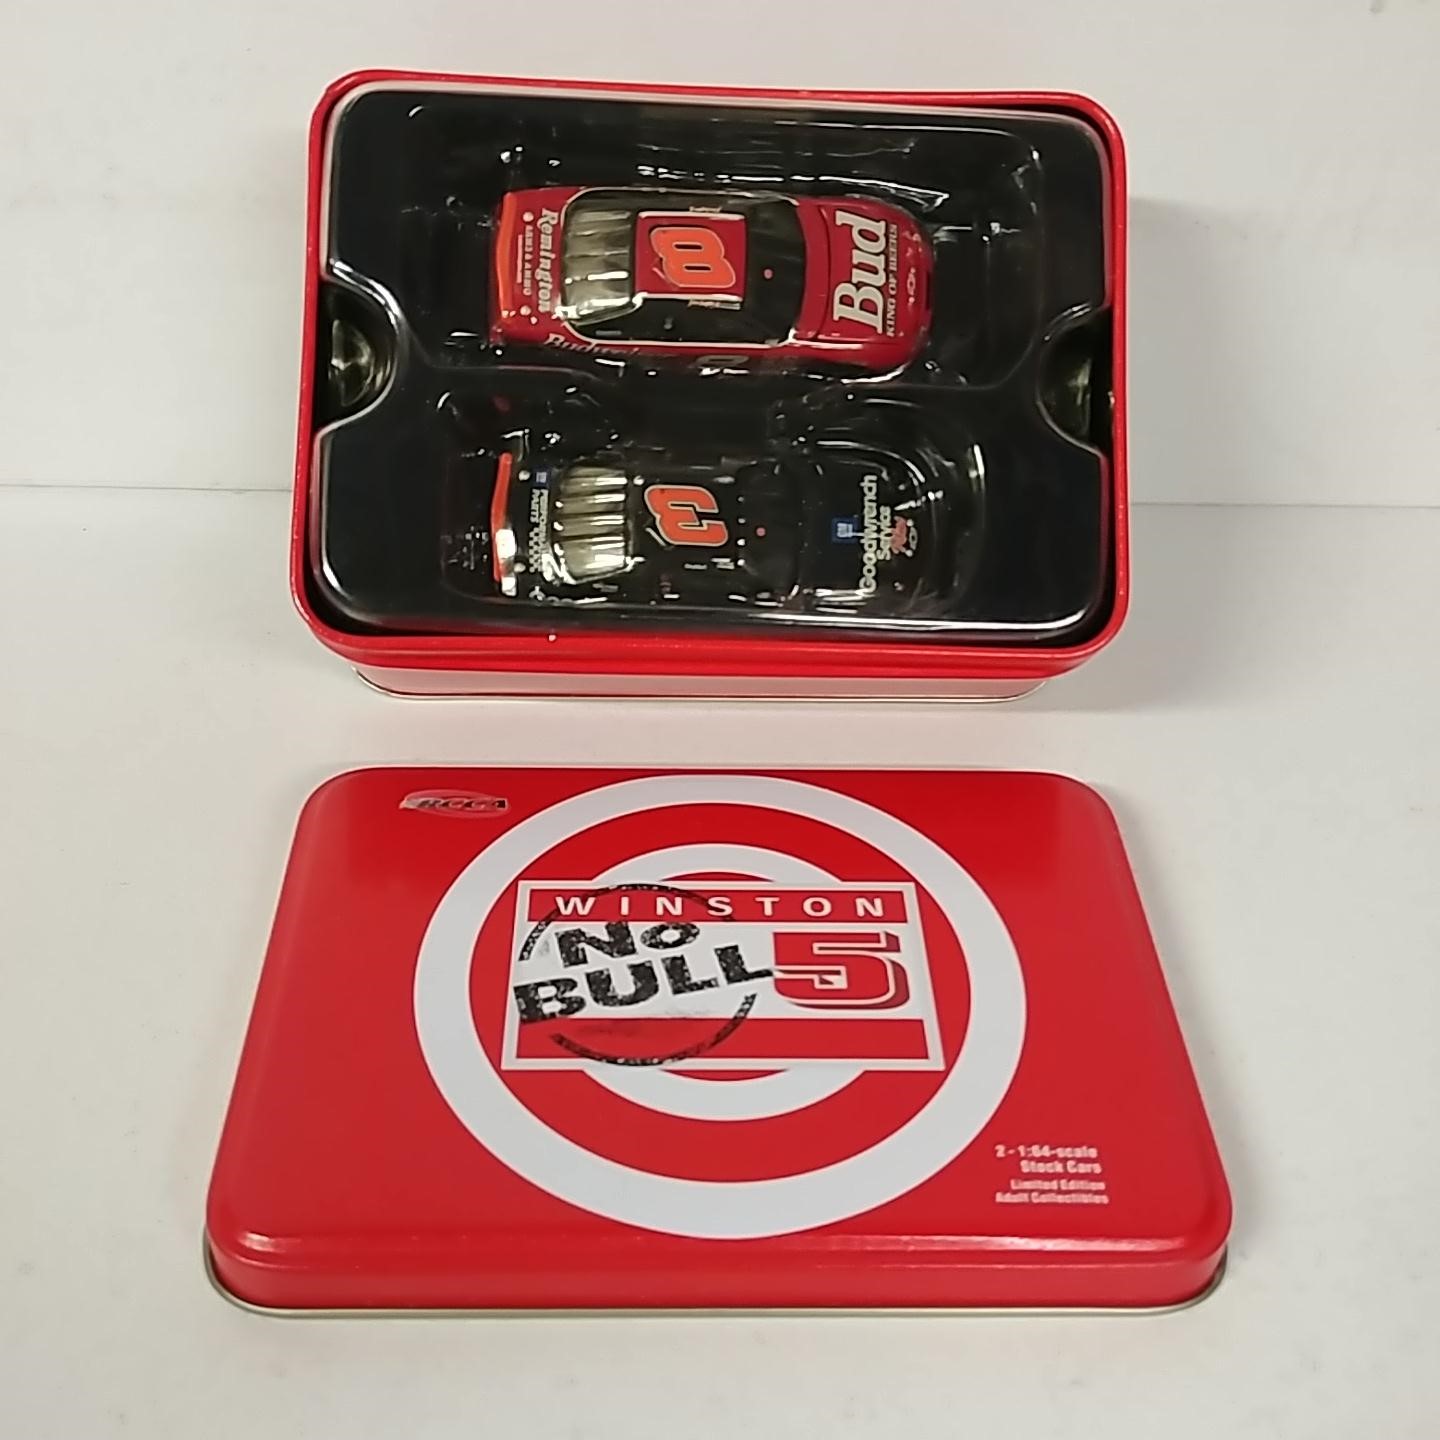 2000 Dale Sr and Dale Jr Earnhardt 1/64th "Winston No Bull" two hood open car tin set